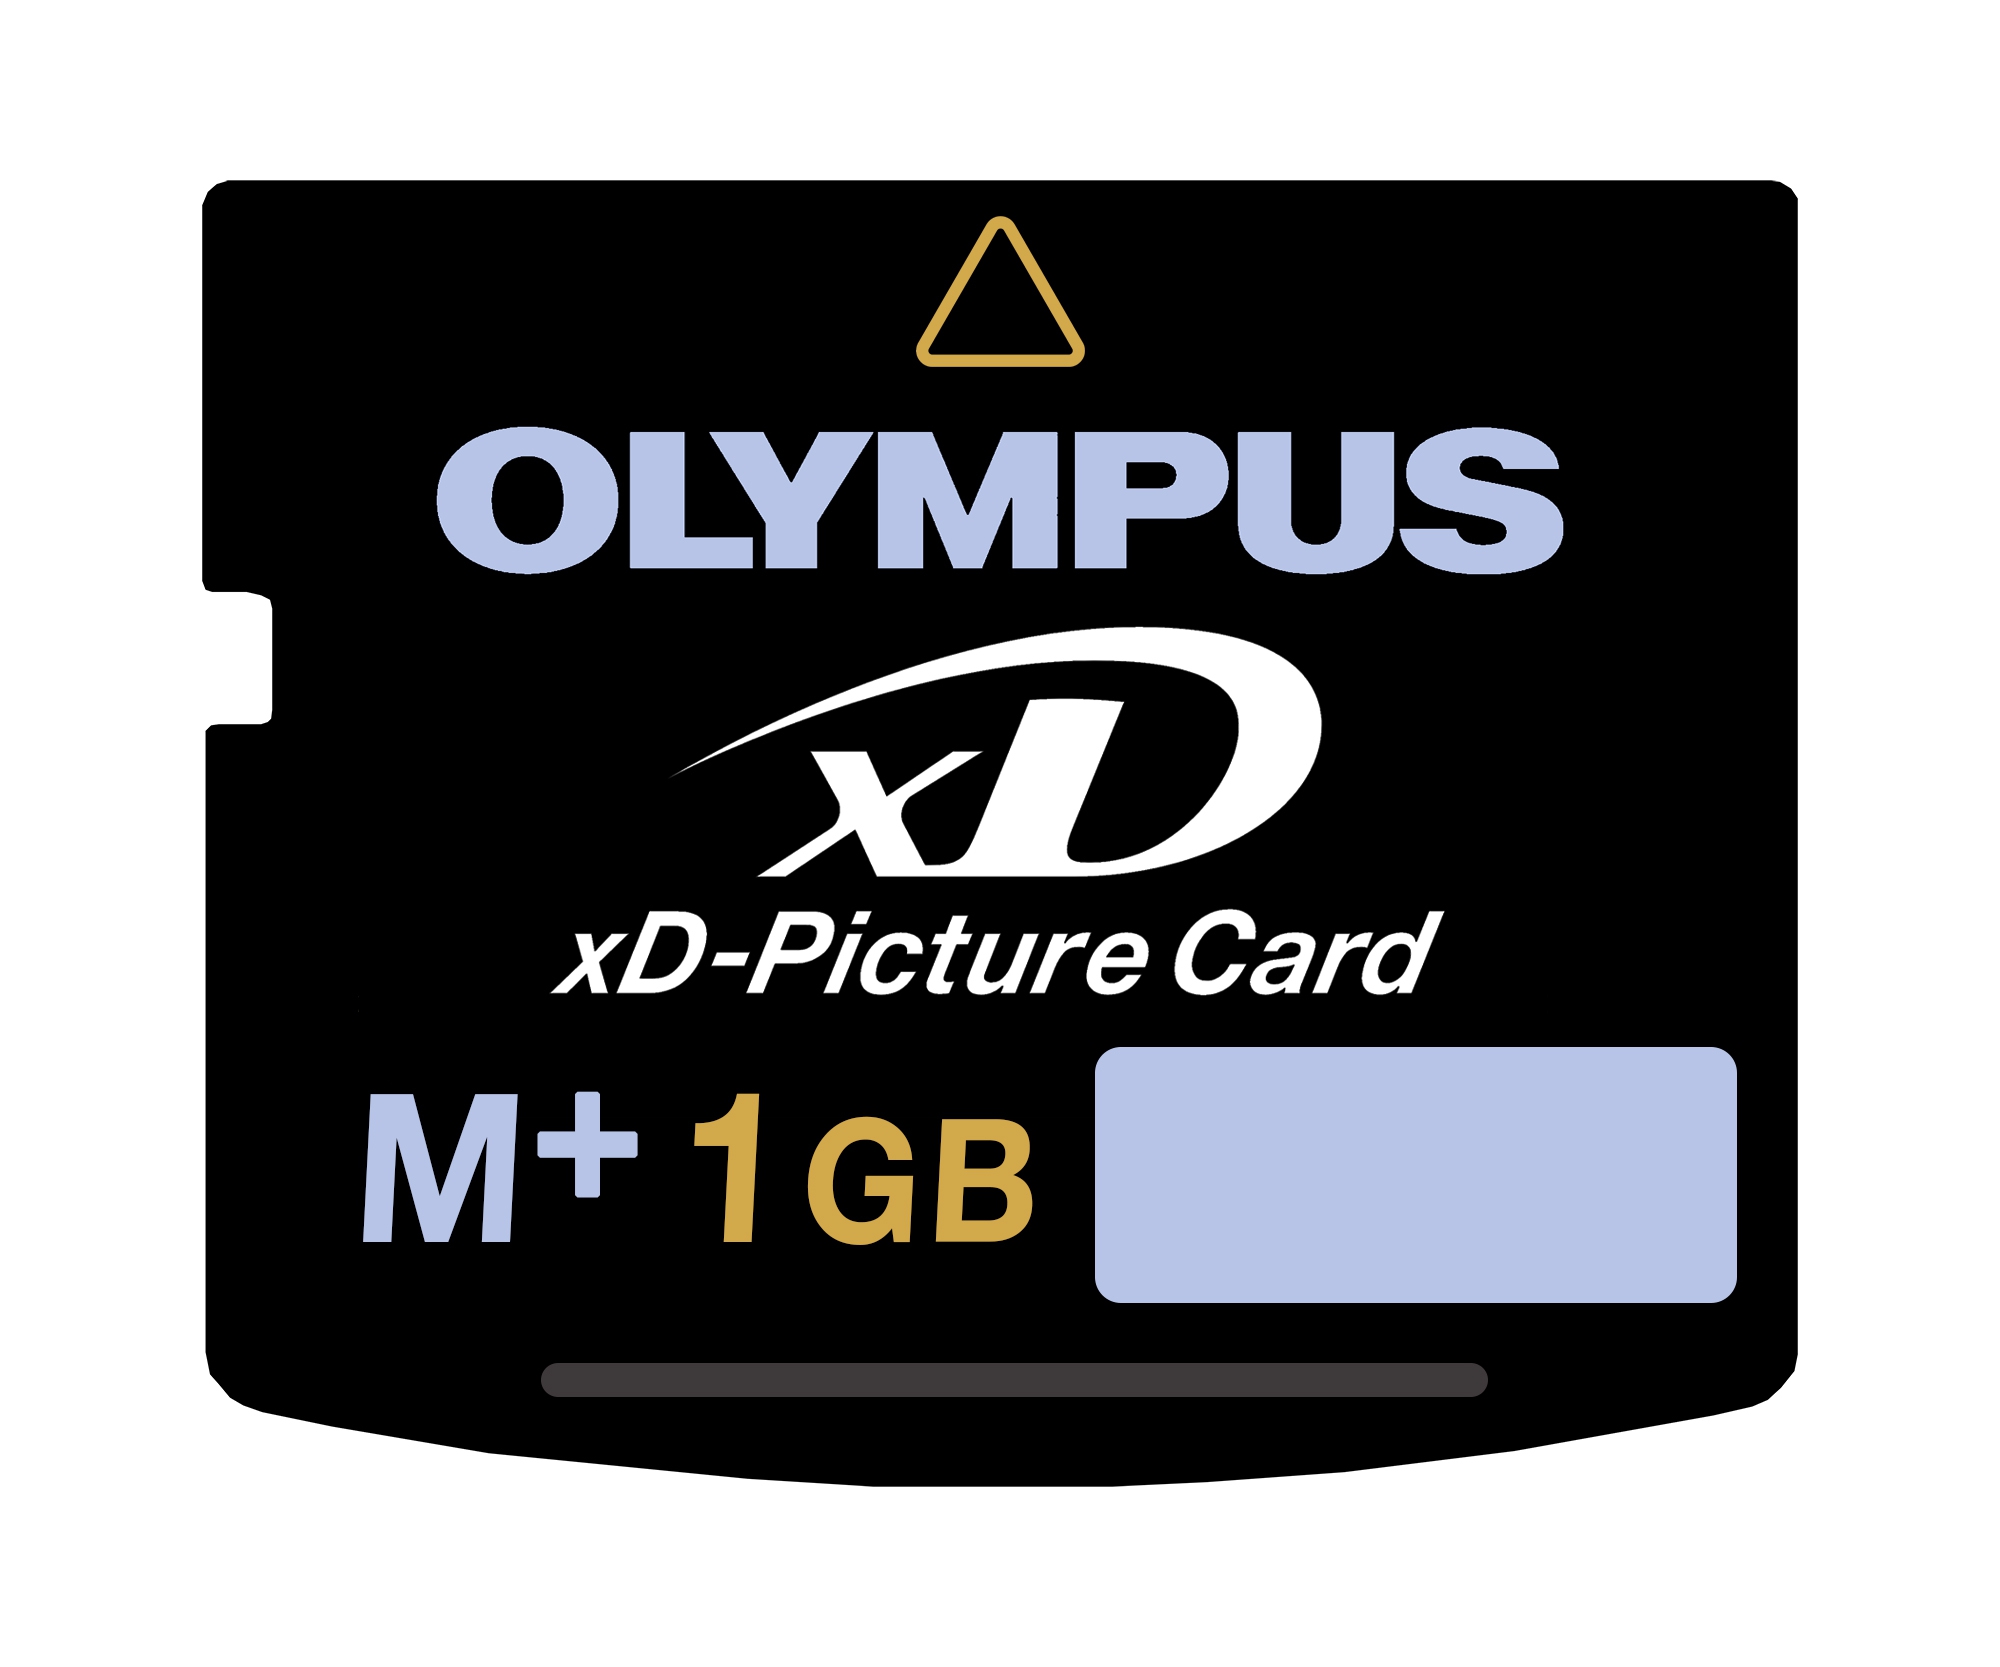 Olympus 1GB xD Picture Card Type M+